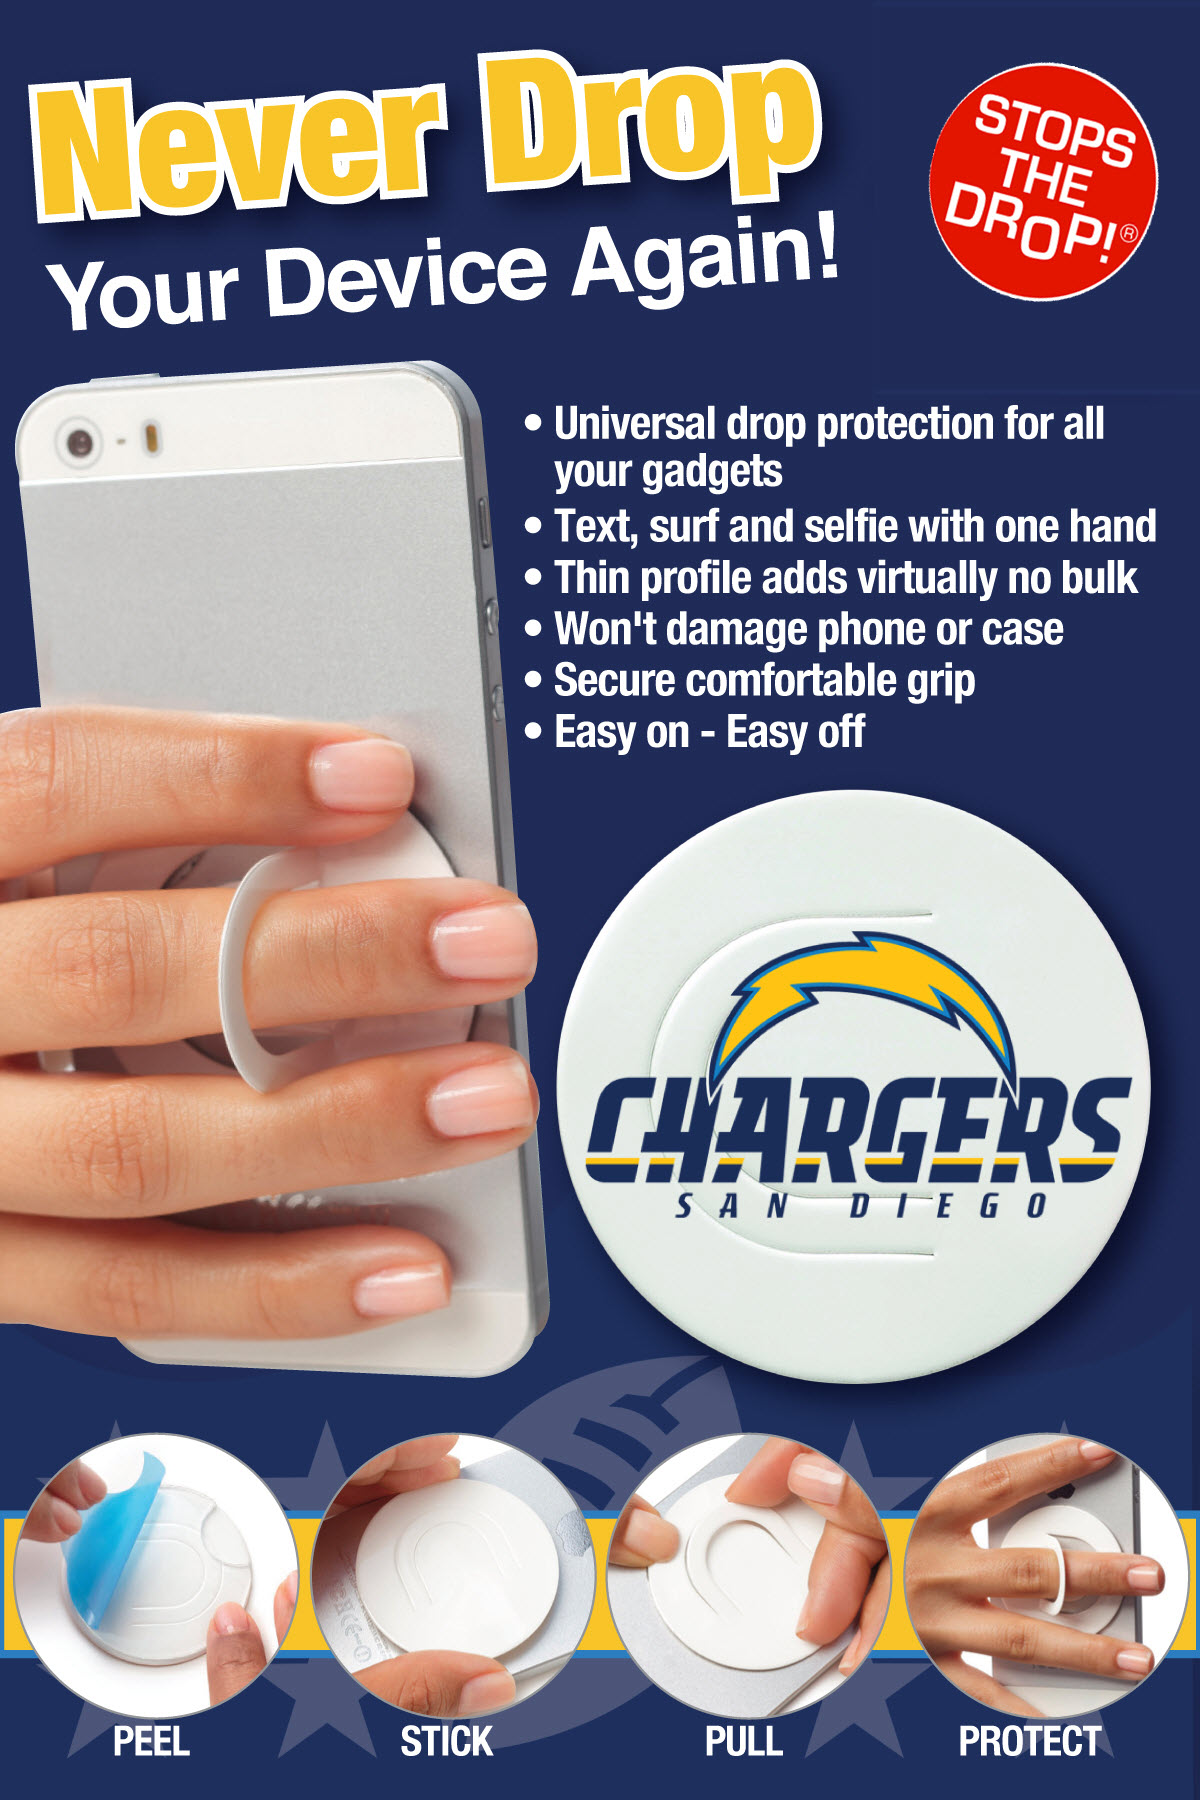 4 x 6-Chargers